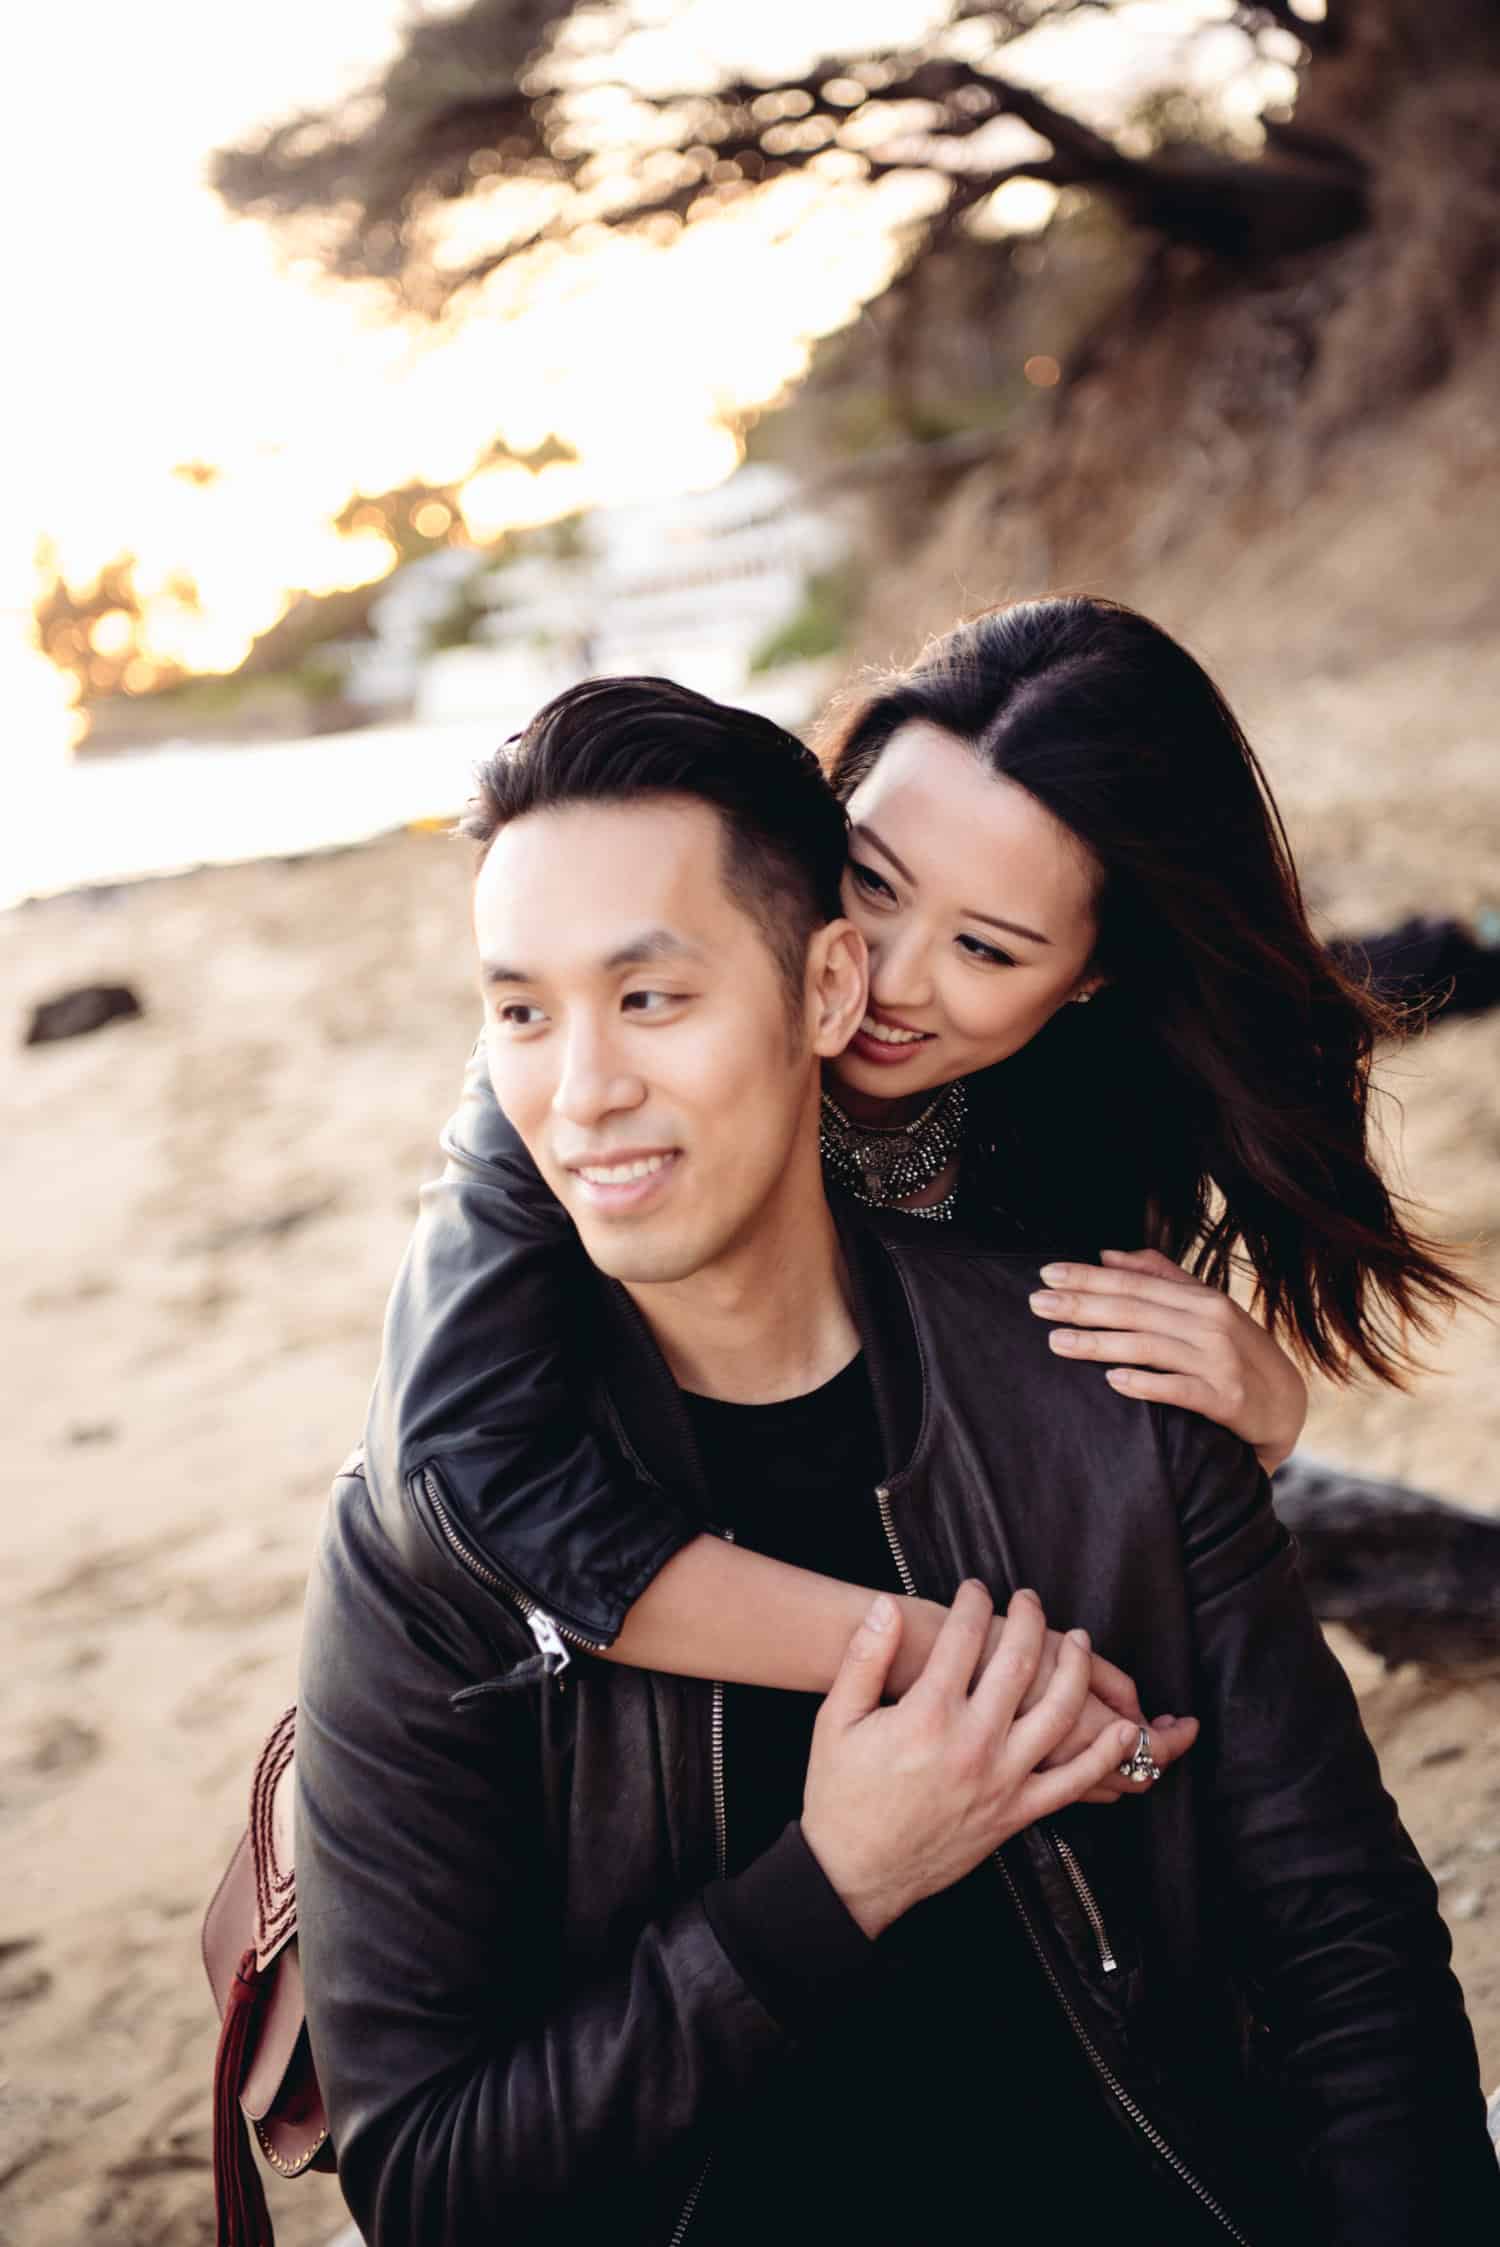 Hawaii Wedding Photographer Engagement Session on Oahu's South Shore